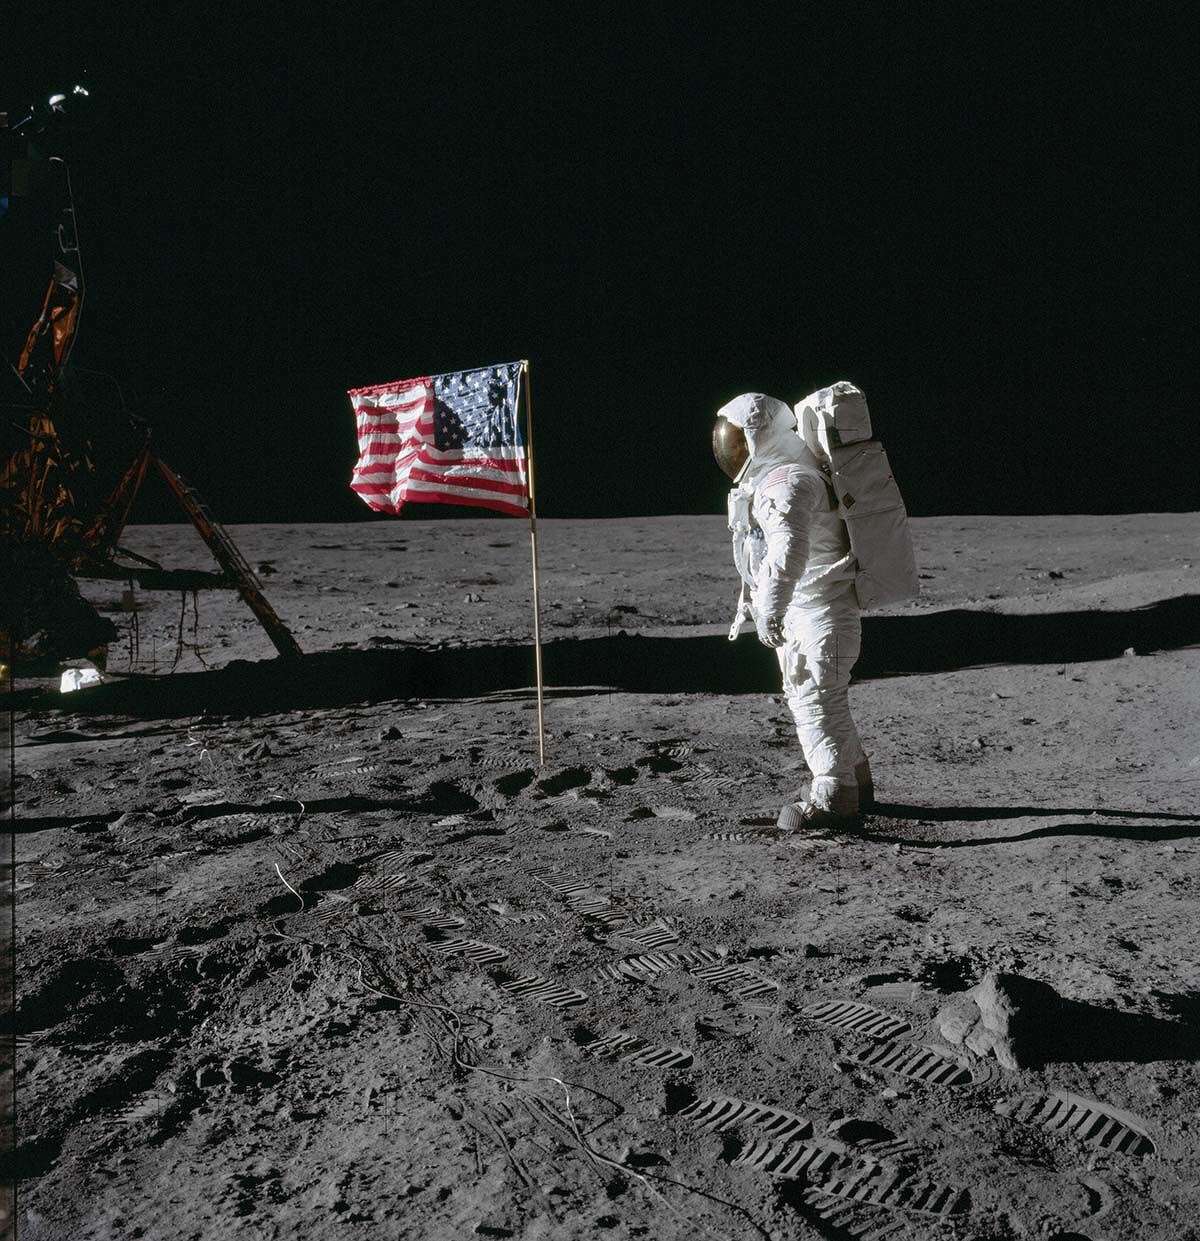 Astronaut Edwin E. Aldrin Jr. during the first moon landing on July 20, 1969. Many of the technologies that helped make the mission possible, including components of the astronauts' suits, were built in Connecticut.